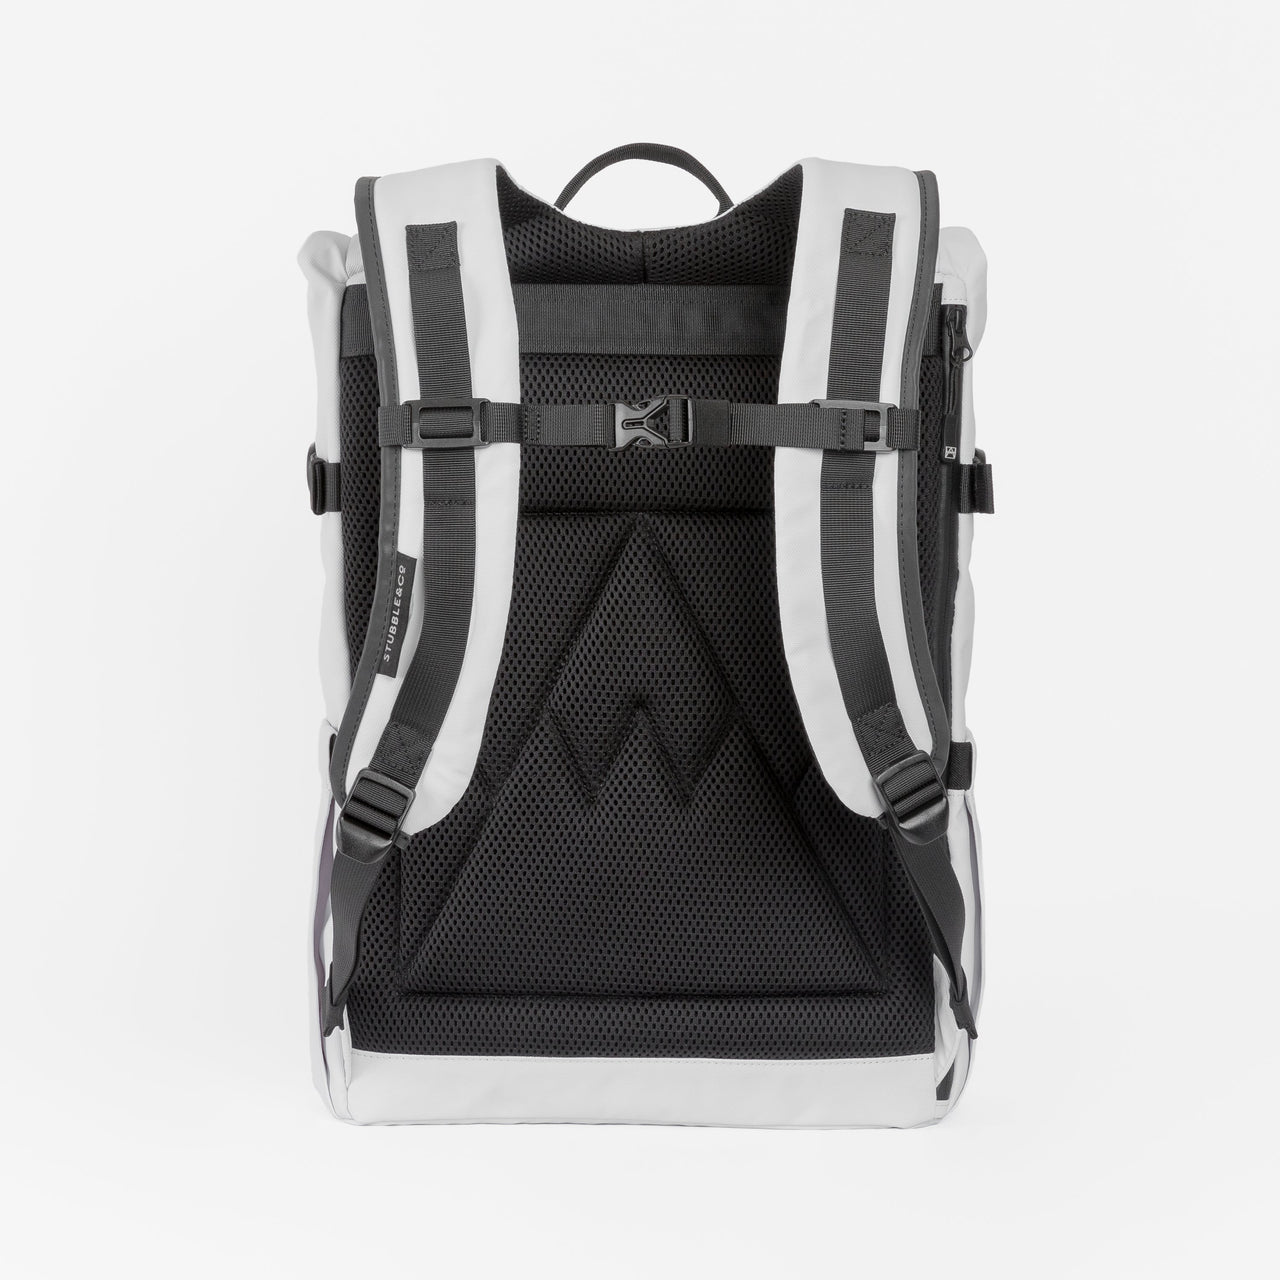 The back of the Roll Top backpack in Arctic White showing the chest straps